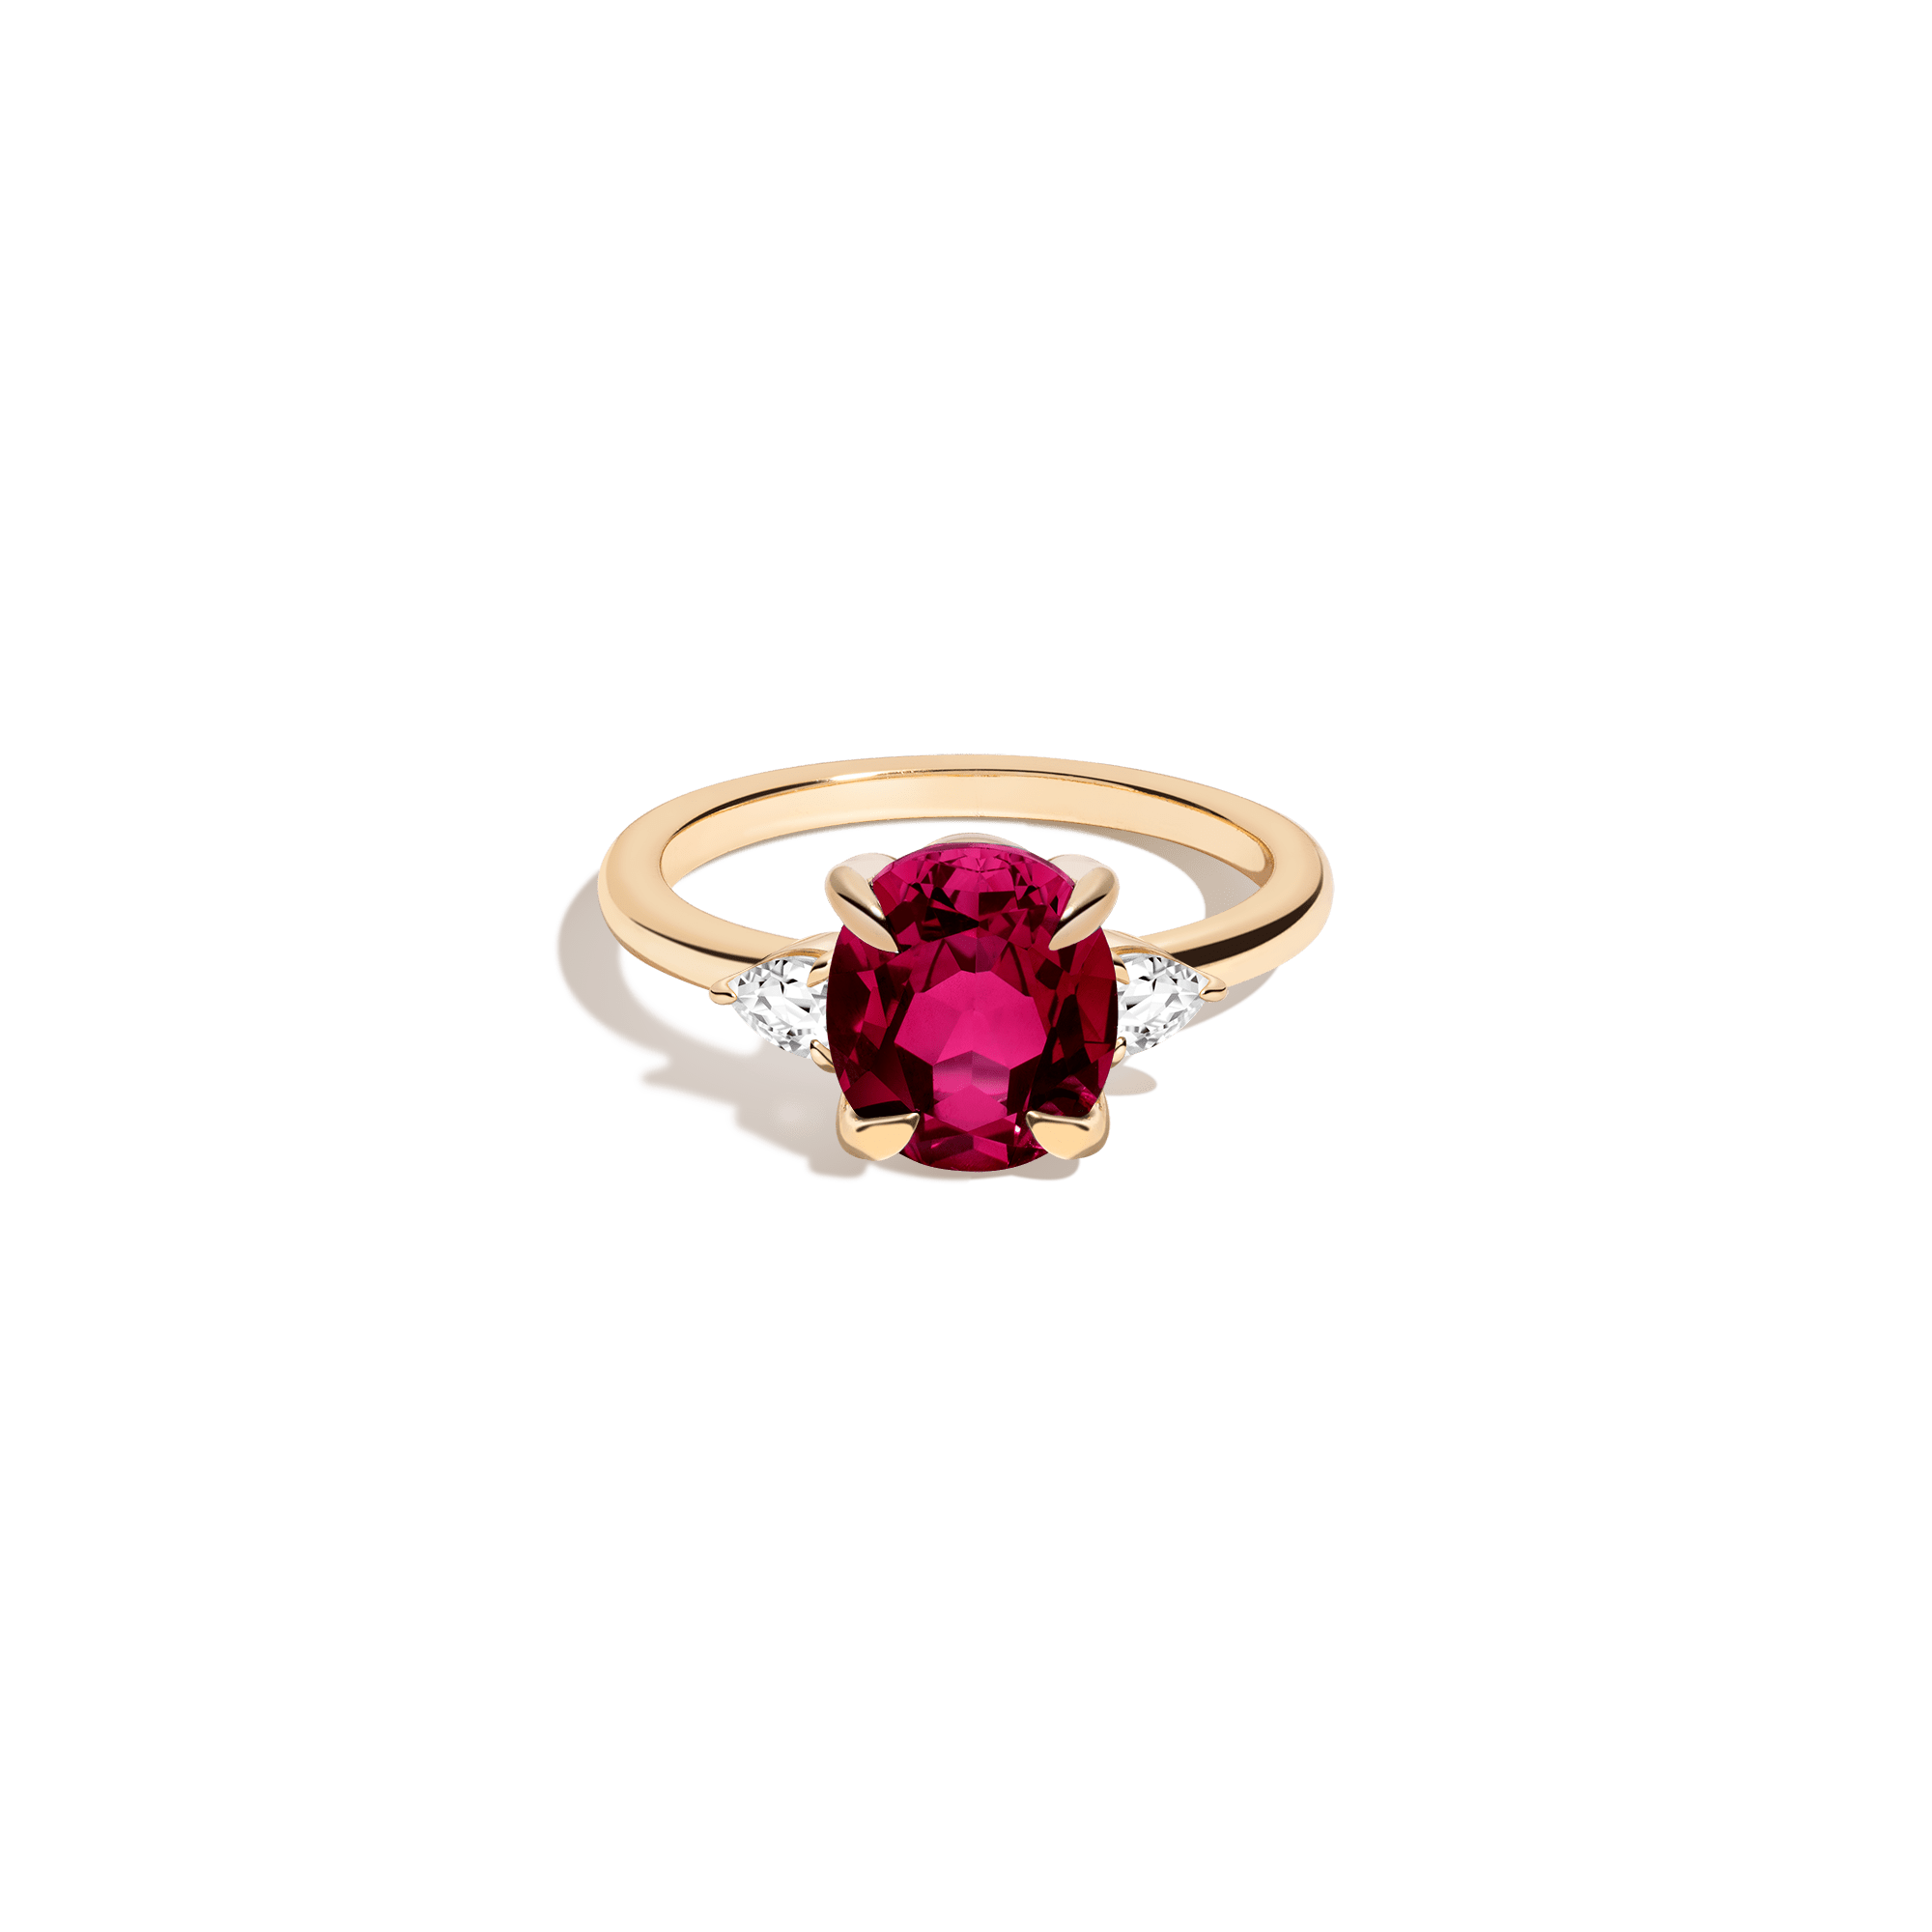 Shop Aurate New York Oval Gemstone Cocktail Ring - Red Ruby In White